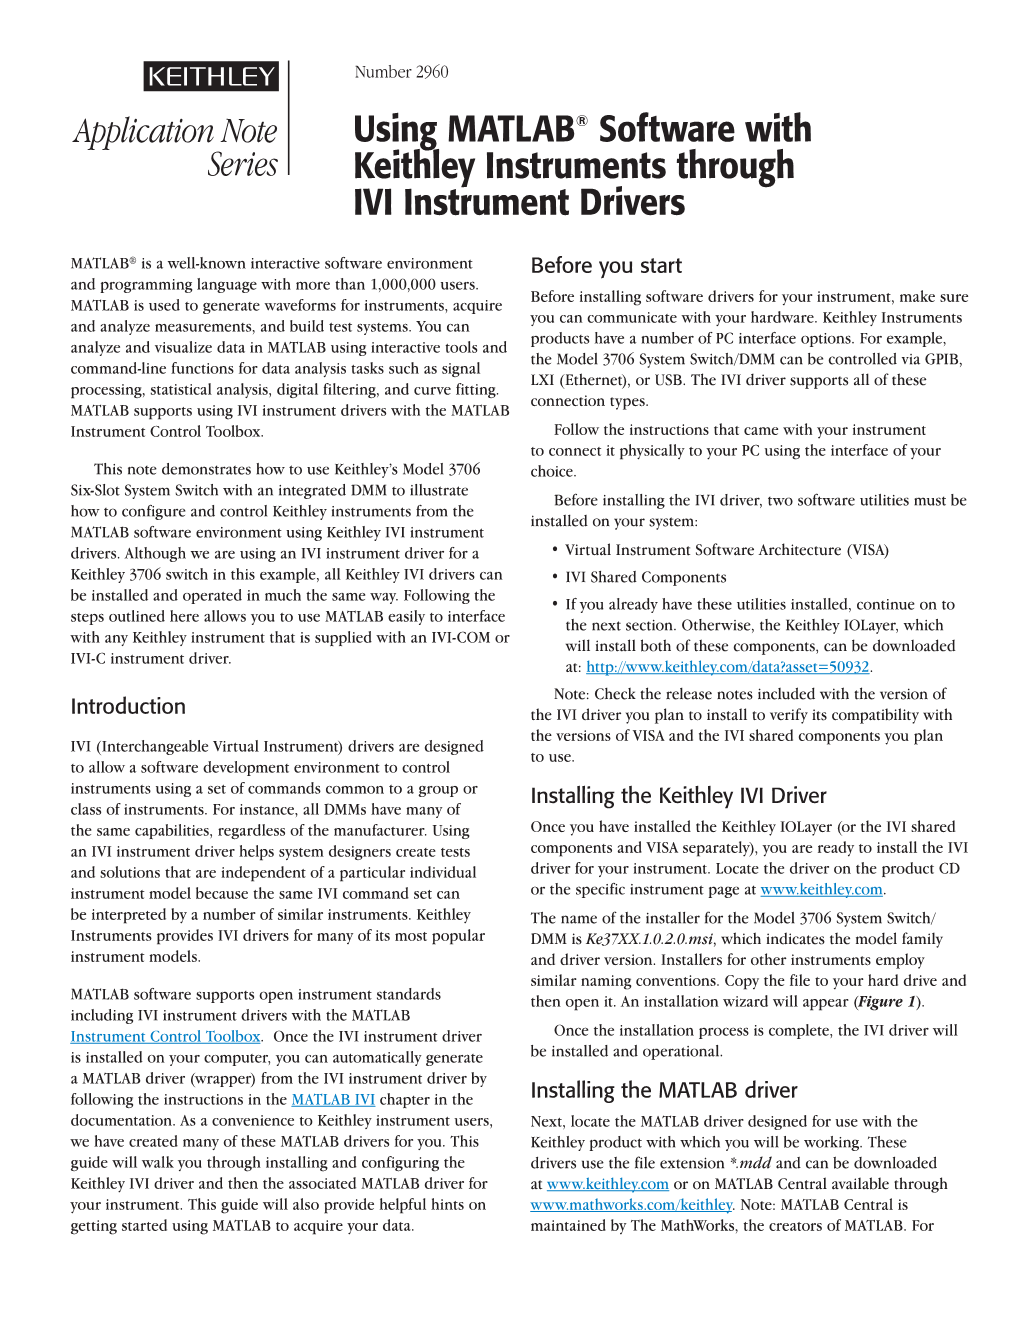 Using MATLAB® Software with Keithley Instruments Through IVI